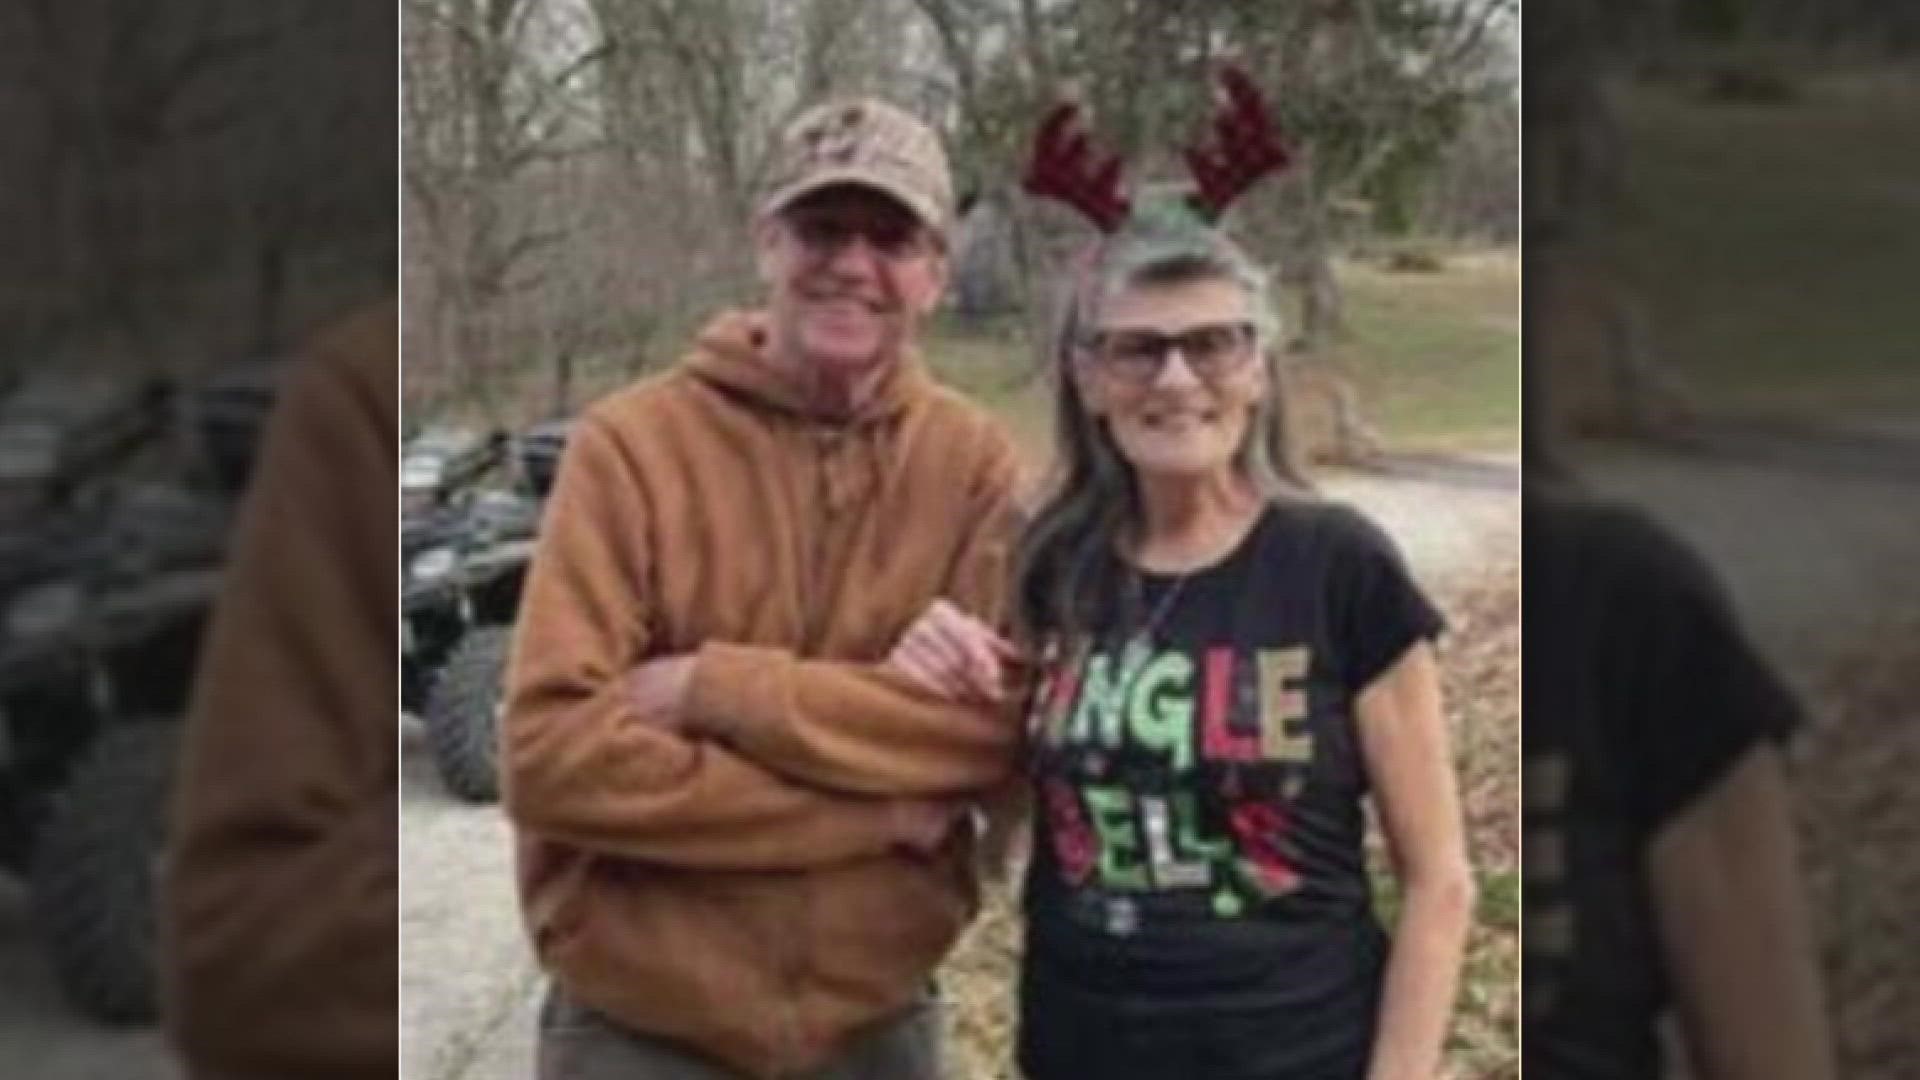 Authorities were looking for Robert and Mary Jane Bowman after communication with family members stopped during a camping trip. The couple was found safe Thursday.